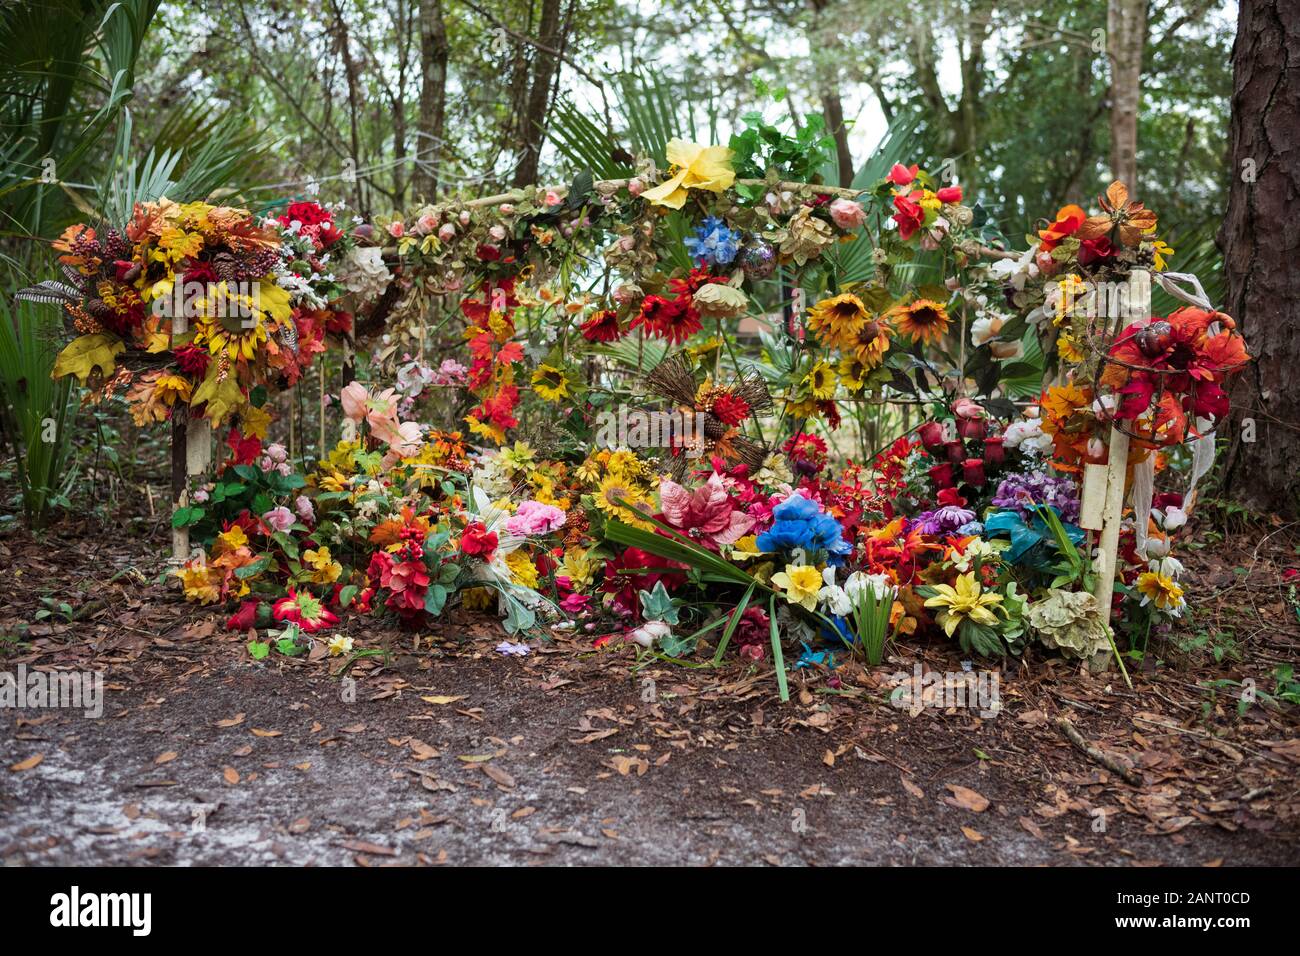 Cassadaga, Fla/USA - Dec 30, 2019: Brimming with colorful fairy wings, gnomes, flowers, and fairy dust, the hidden Fairy Trail of  Horseshoe Park, is Stock Photo